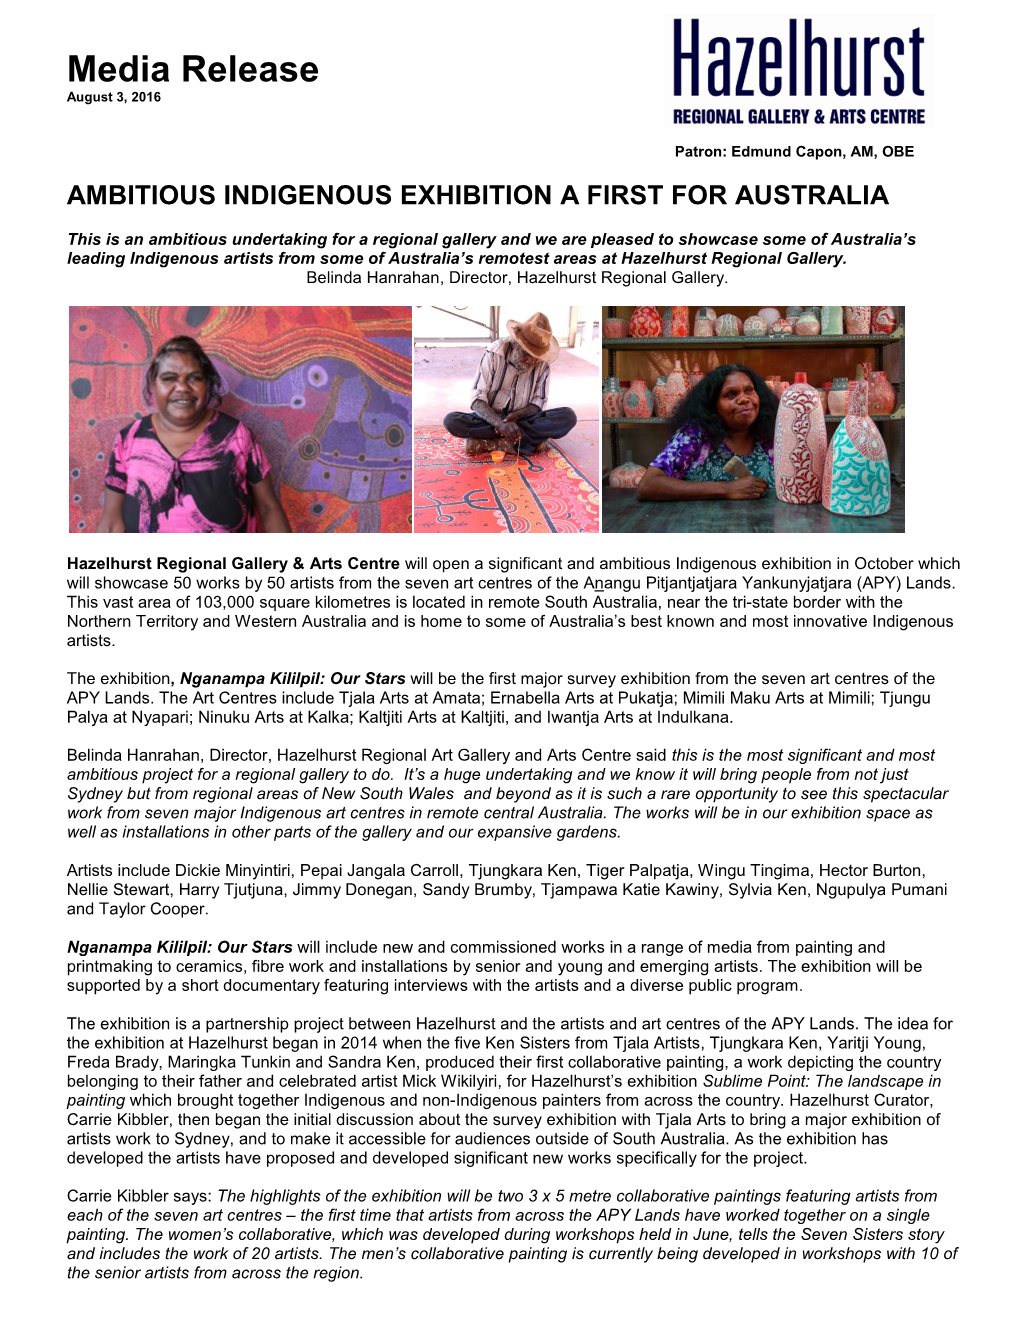 Nganampa Kililpil: Our Stars Will Be the First Major Survey Exhibition from the Seven Art Centres of the APY Lands